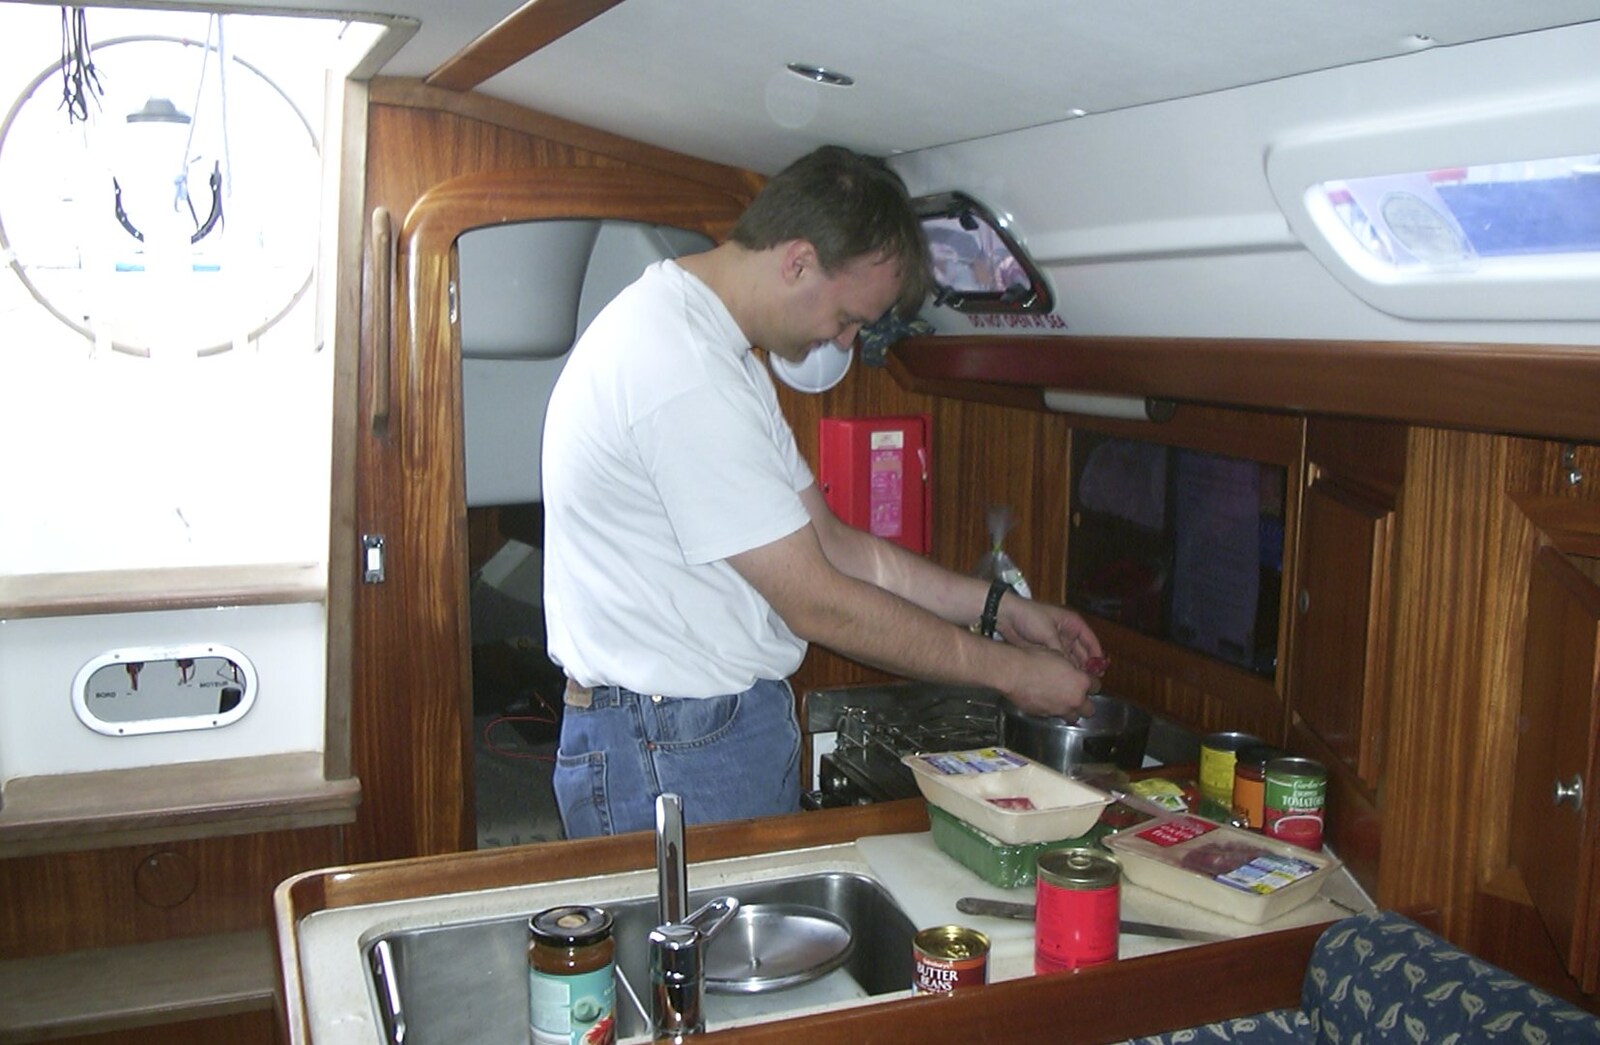 Nick rustles up some food from A 3G Lab Sailing Trip, Shotley, Suffolk - 6th September 2001